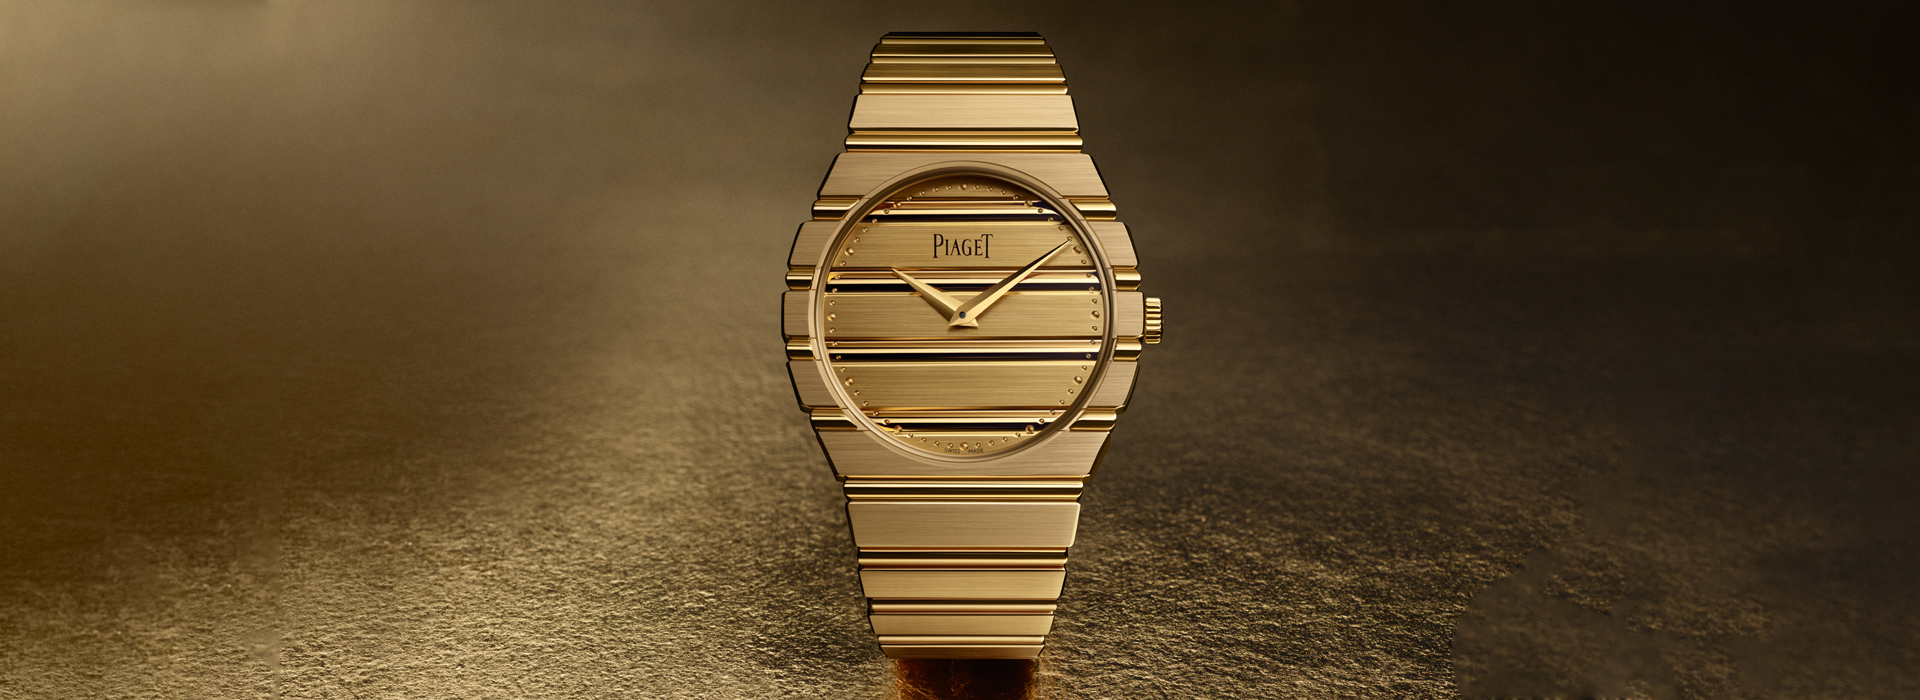 Piaget pays homage to the 80s with a solid gold watch